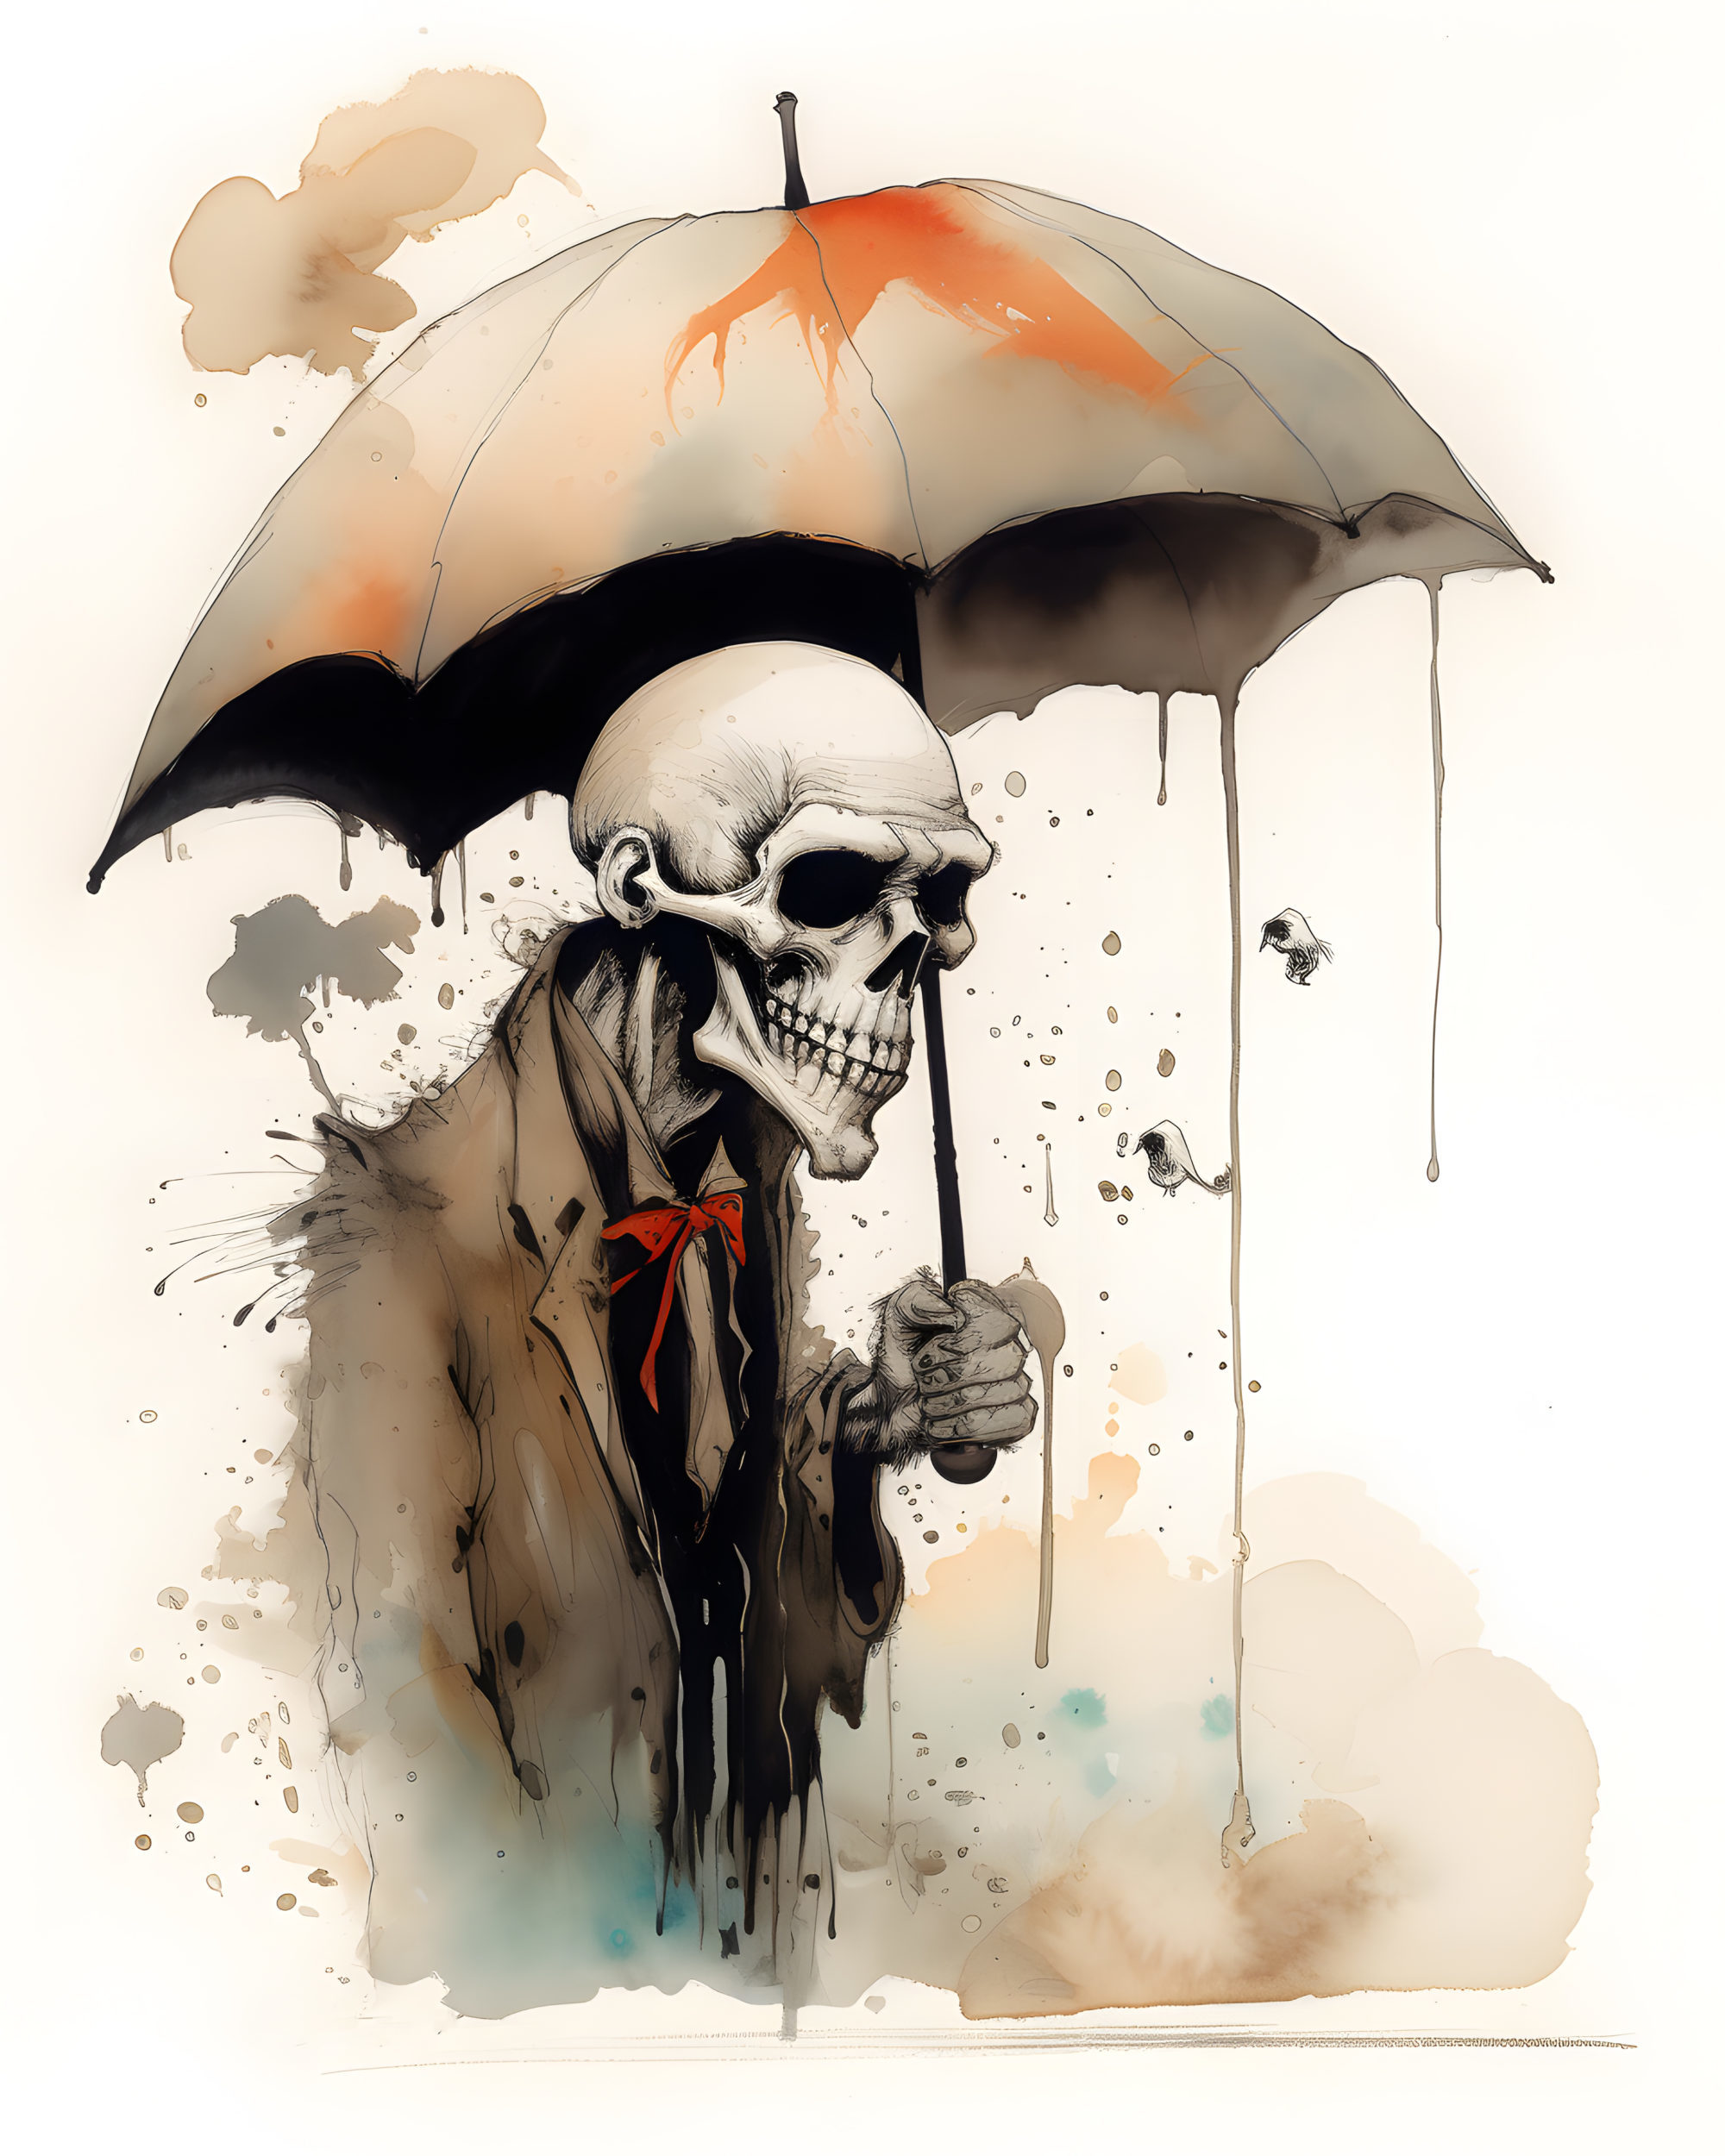 'Ink the Reaper' - Captivating Grim Reaper illustrations with black ink and watercolor splotches, exploring mortality and eternity.